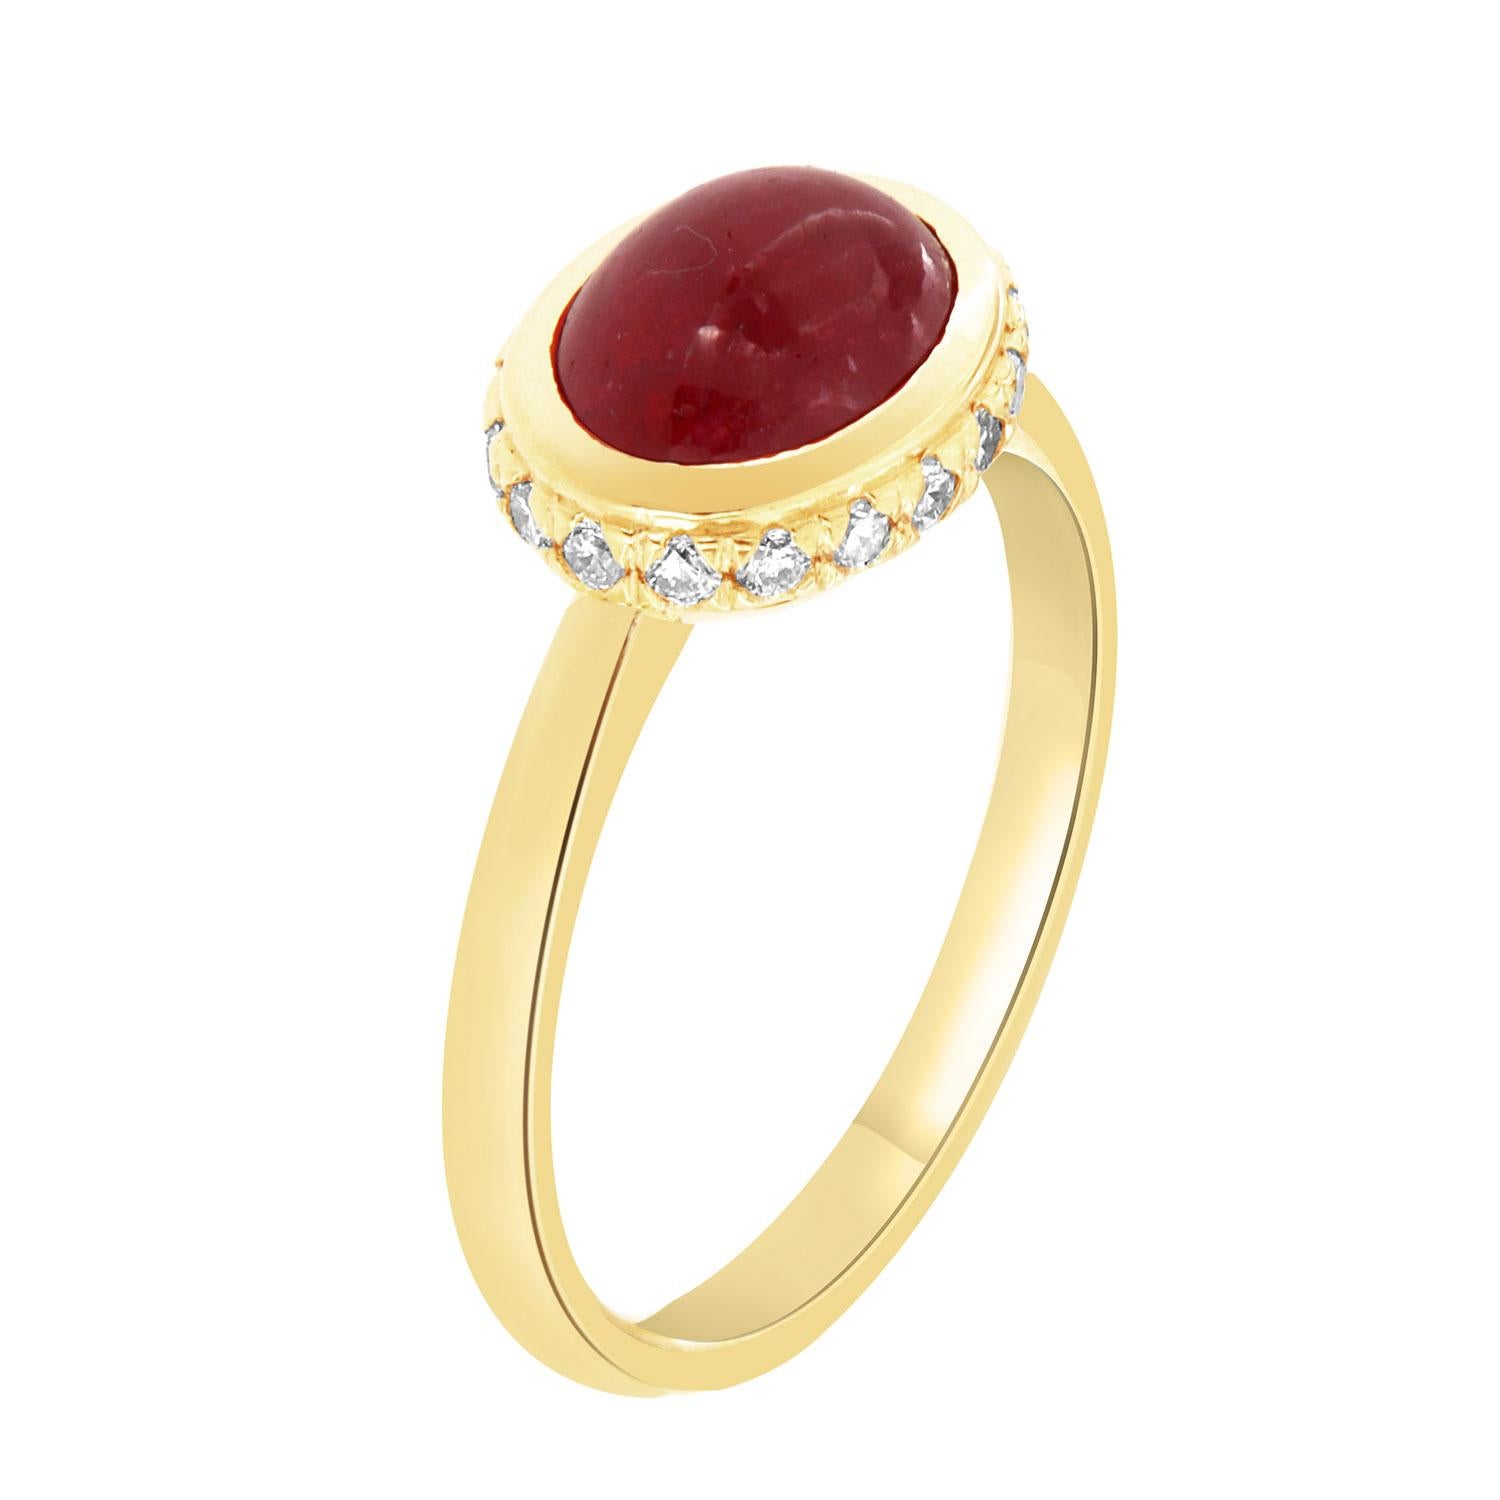 This 18k yellow gold delicate ring features a 2.56 Carat Cabochon Ruby bezel set East-West style. Eighteen (18)Brilliant round diamonds are micro-prong set in a hidden halo on the crown to create the sparkle look every woman is looking to have. The